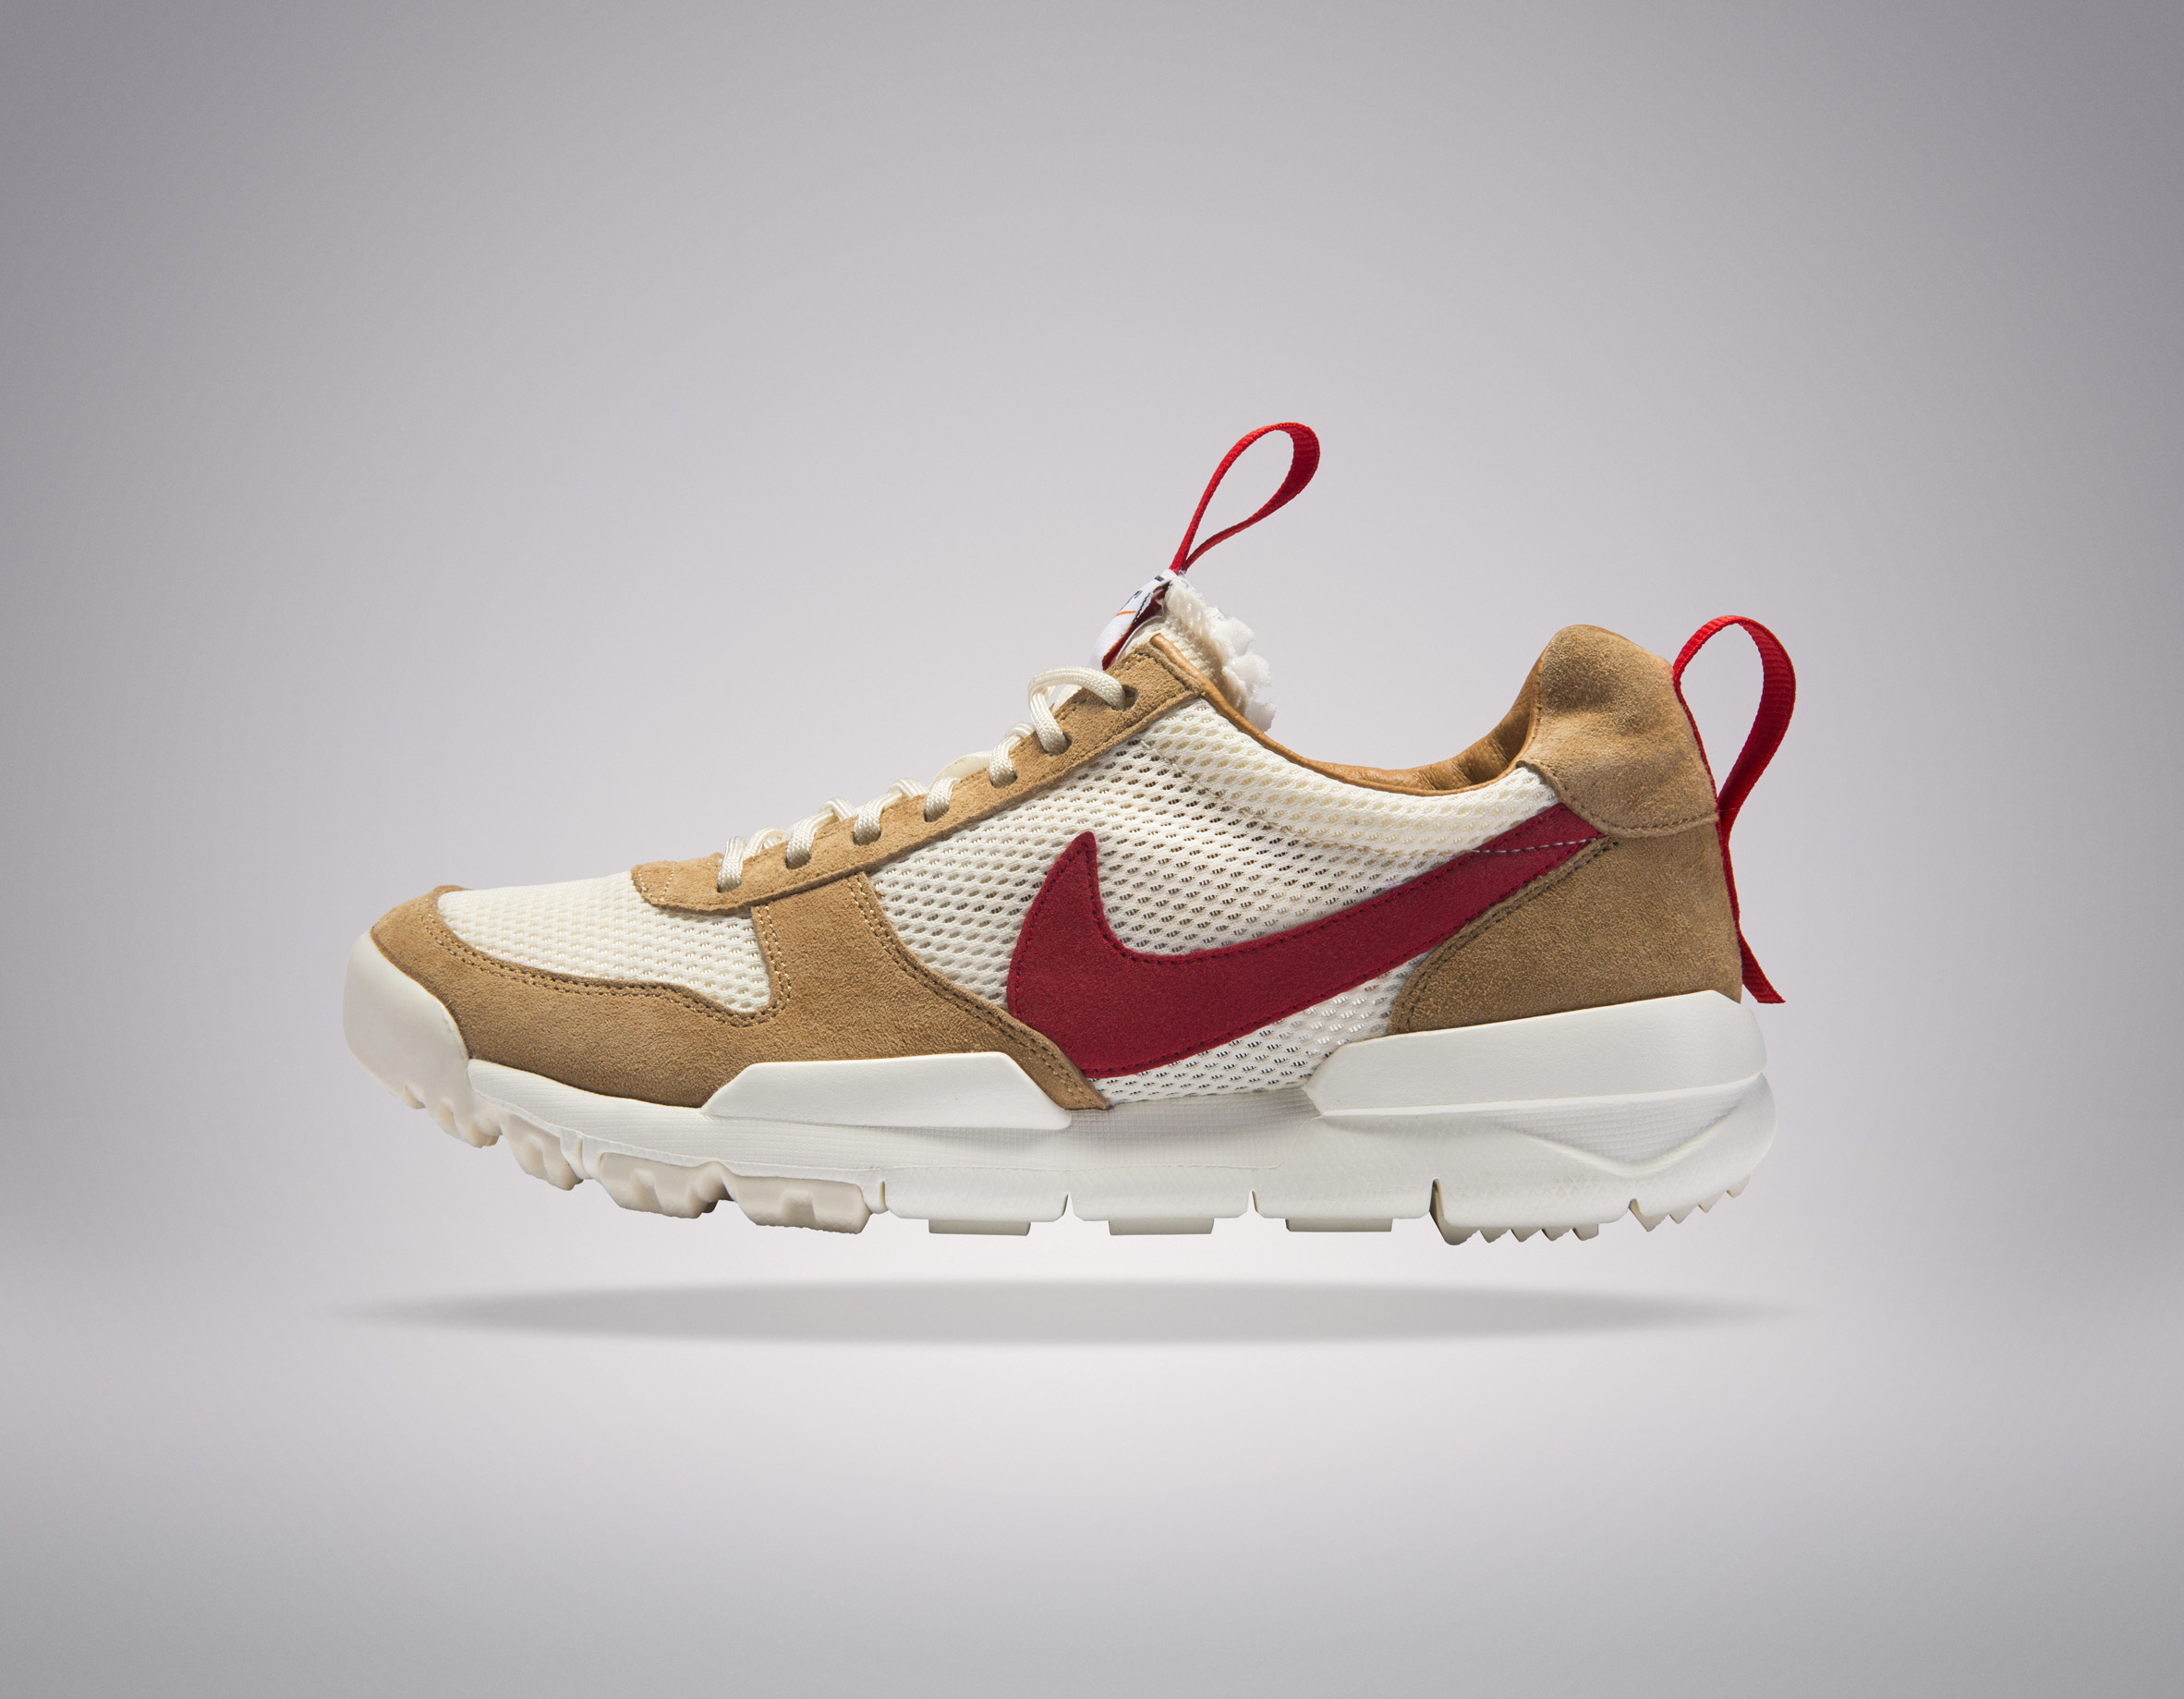 Desviar novedad cazar Tom Sachs releases second edition of Mars Yard sneakers for Nike